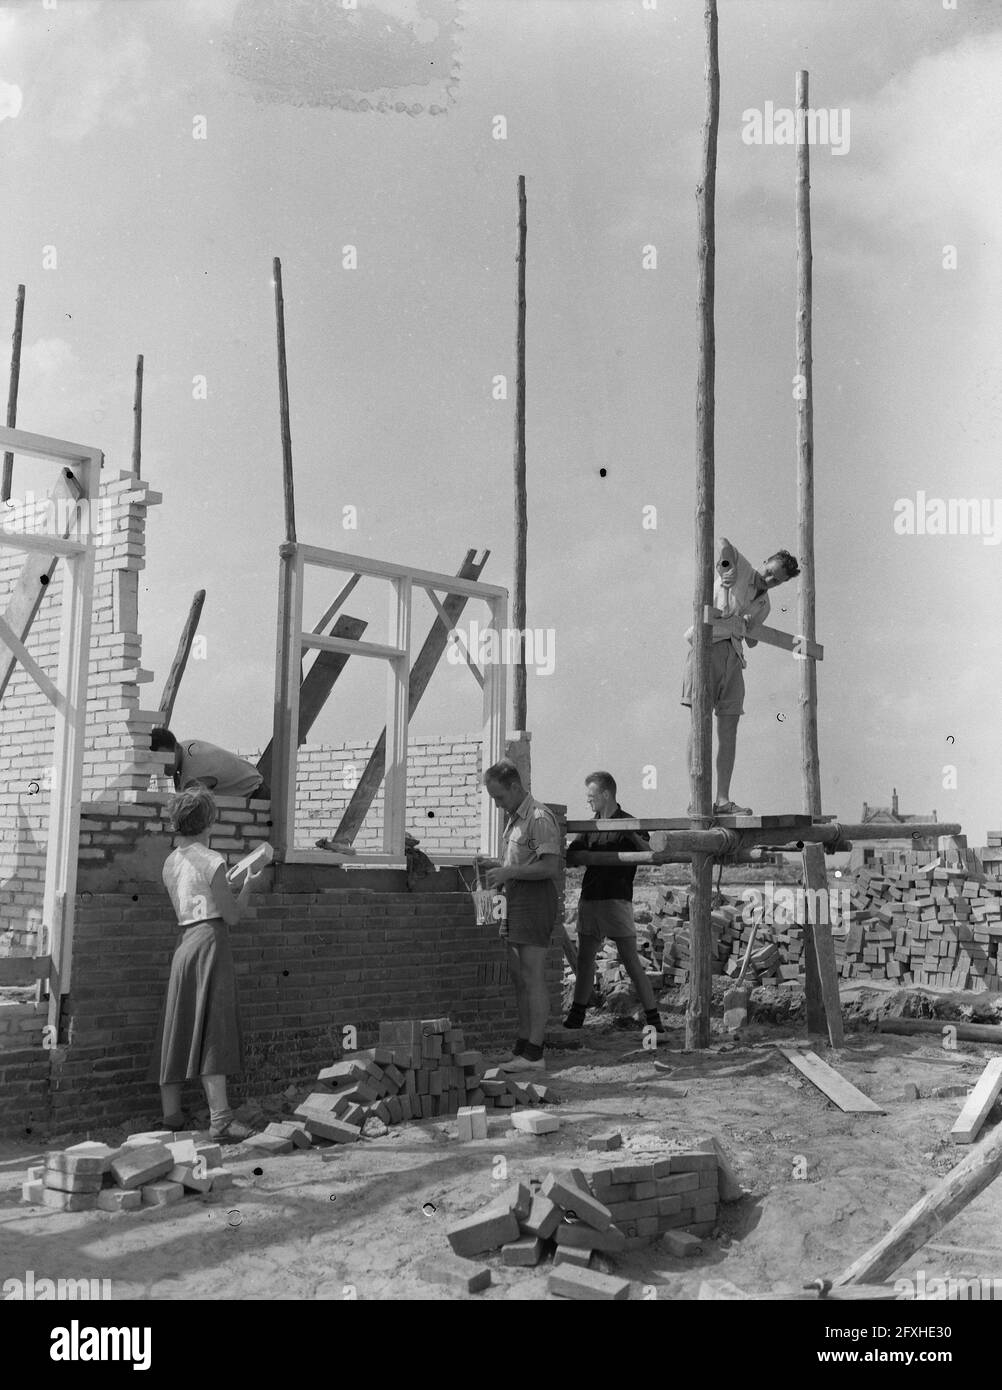 Volunteers including foreign youngsters help construction in Zeeland, at Nieuwerkerk Schouwen Duiveland, August 30, 1955, VOLUNTEERS, The Netherlands, 20th century press agency photo, news to remember, documentary, historic photography 1945-1990, visual stories, human history of the Twentieth Century, capturing moments in time Stock Photo